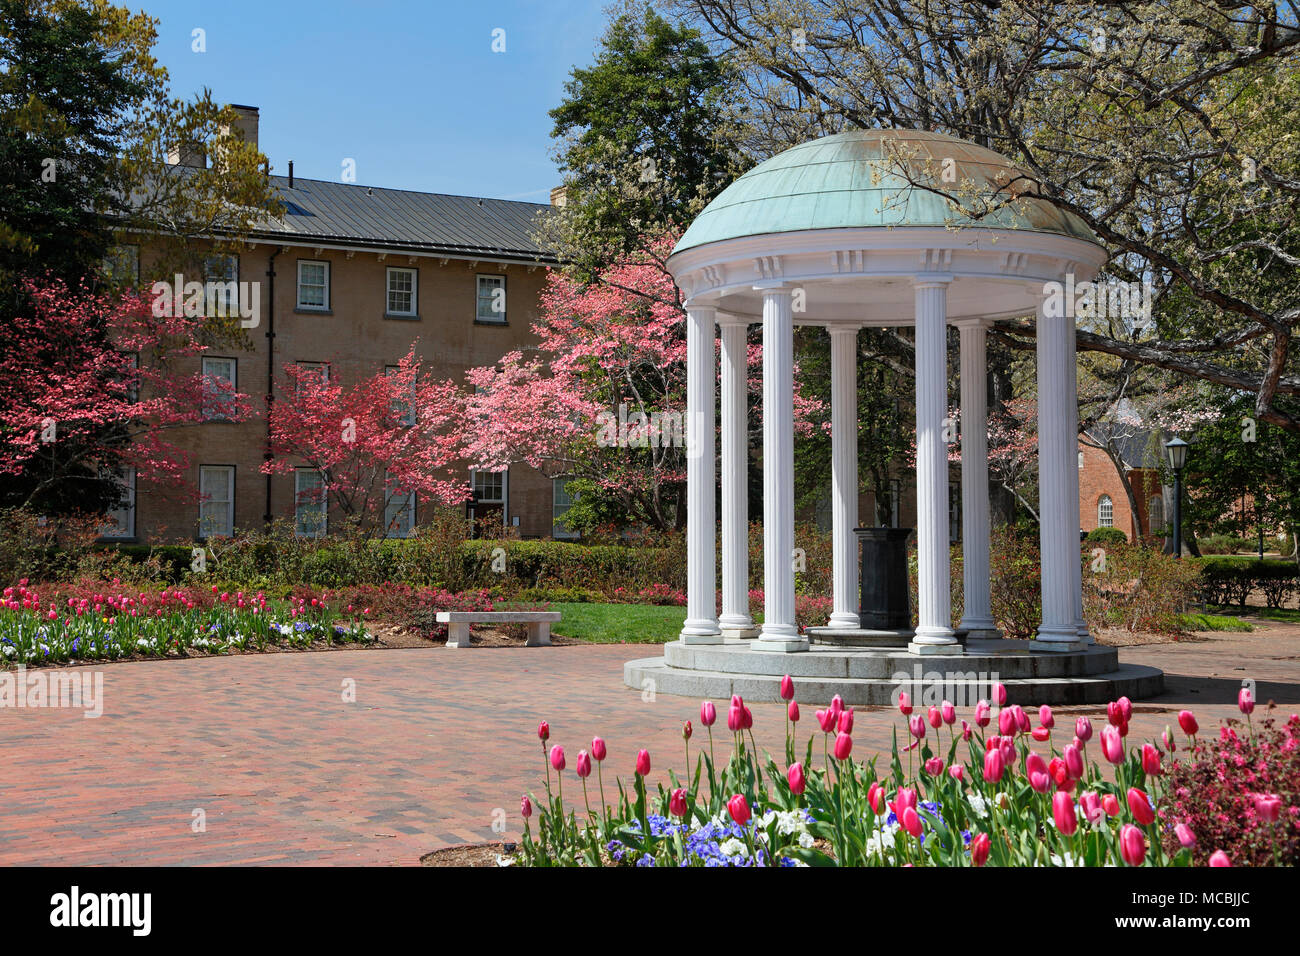 Old Well at the University of North Carolina, Chapel Hill, surrounded by Tulips and pink Dogwood. Stock Photo